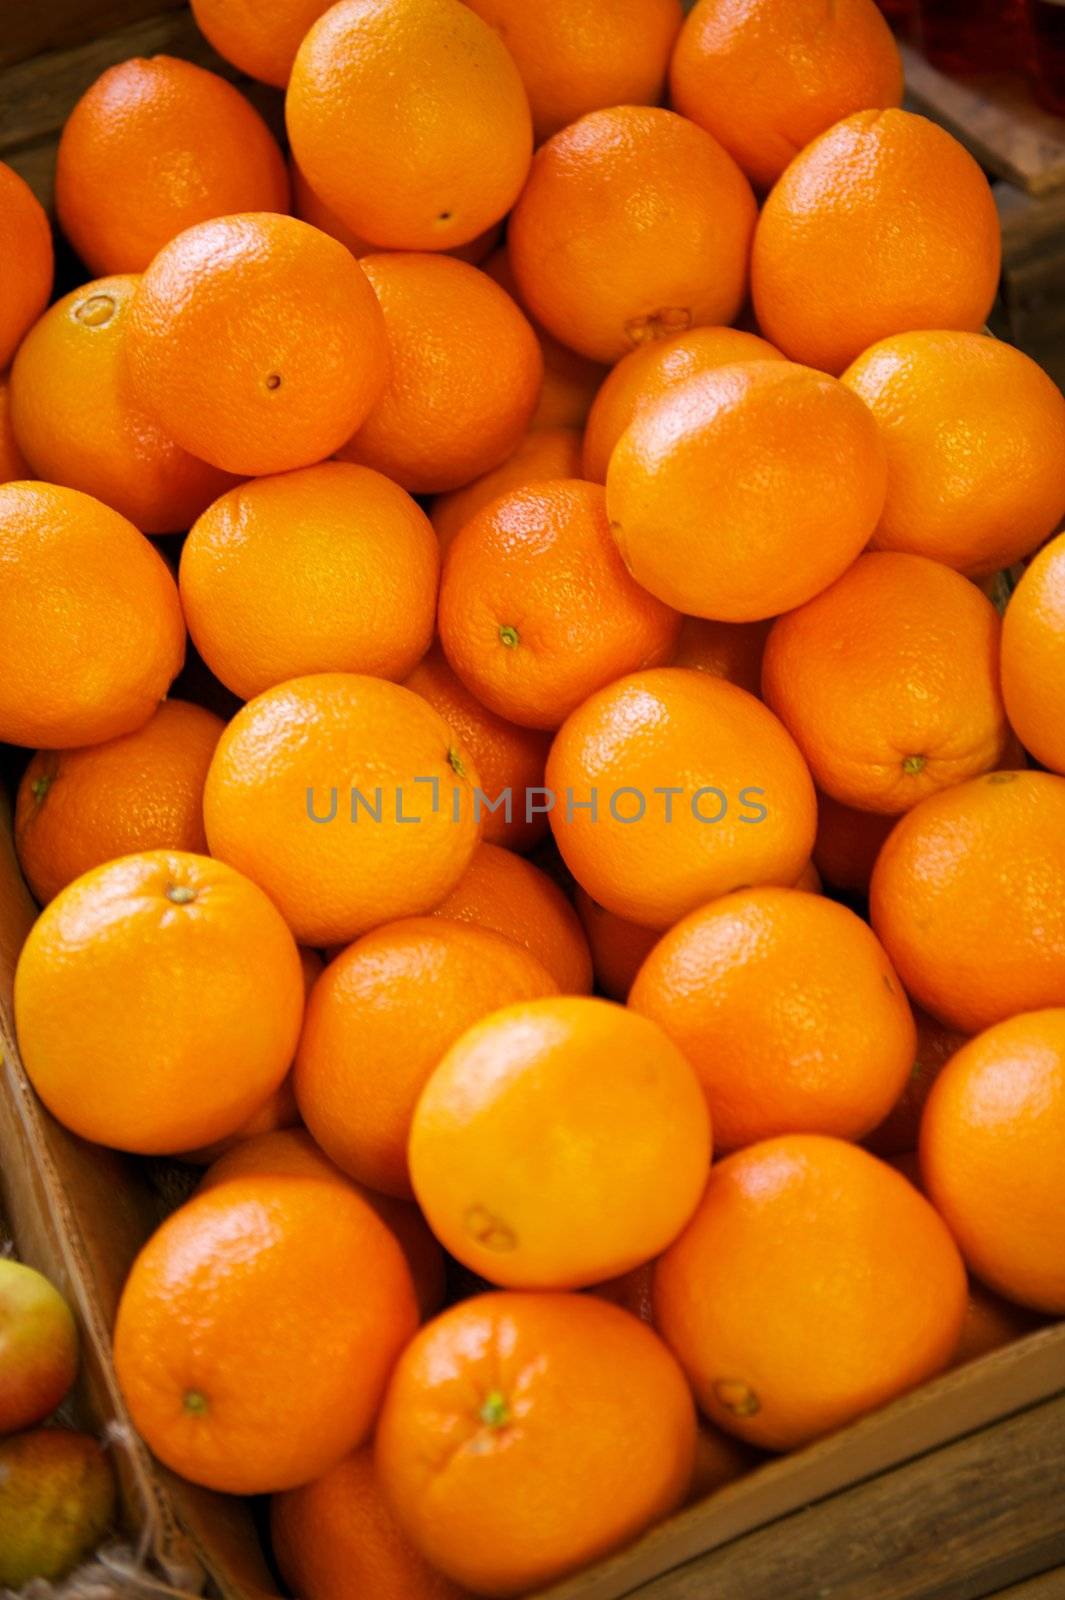 Navel Oranges in a crate by pixelsnap